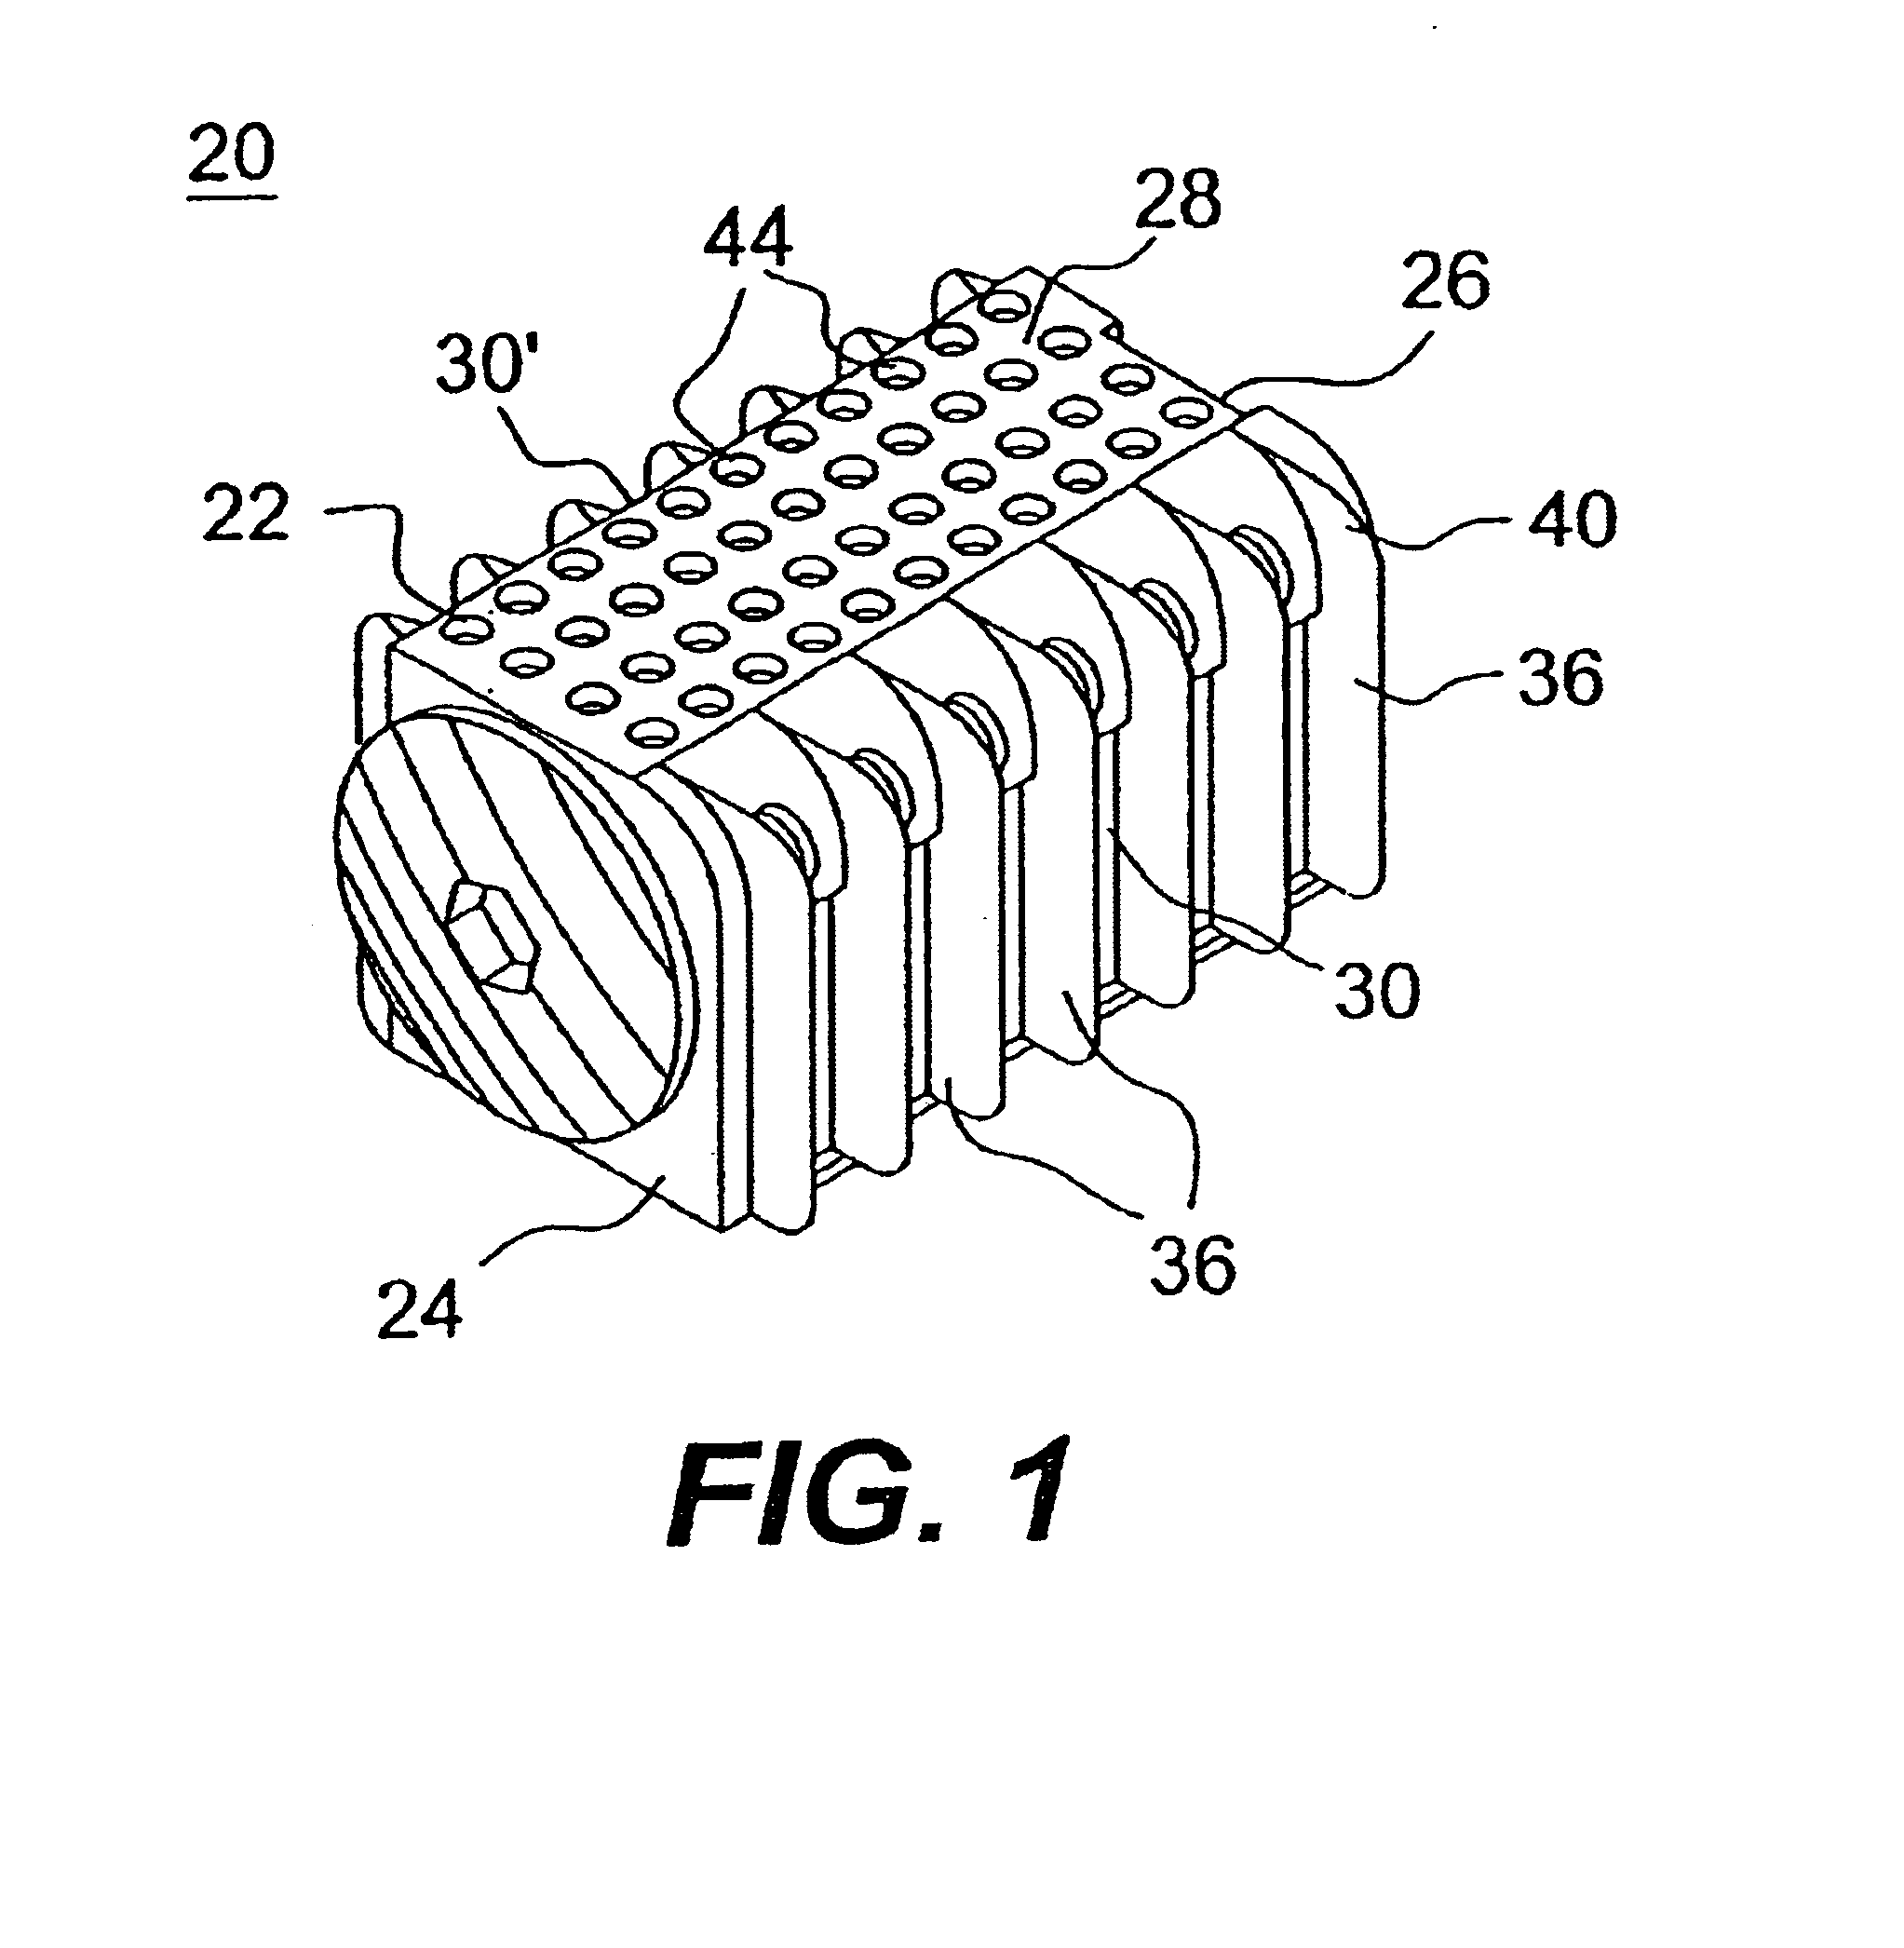 Self-broaching, rotatable, push-in interbody spinal fusion implant and method for deployment thereof